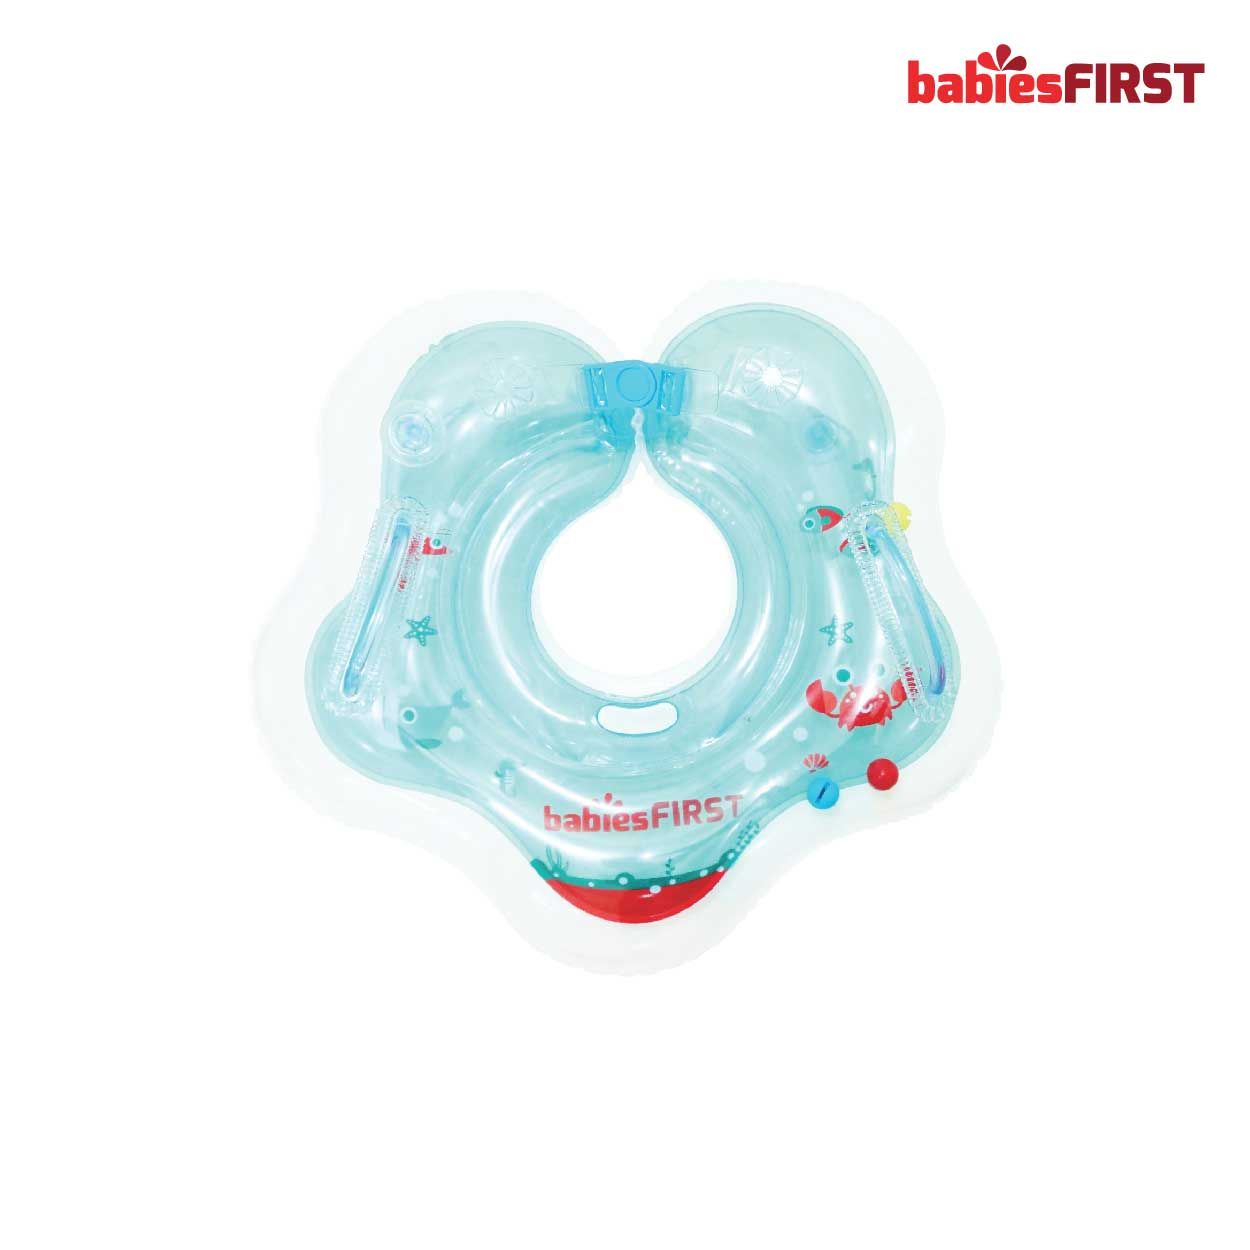 Babiesfirst Inflatable Baby Neck Ring Blue - 2